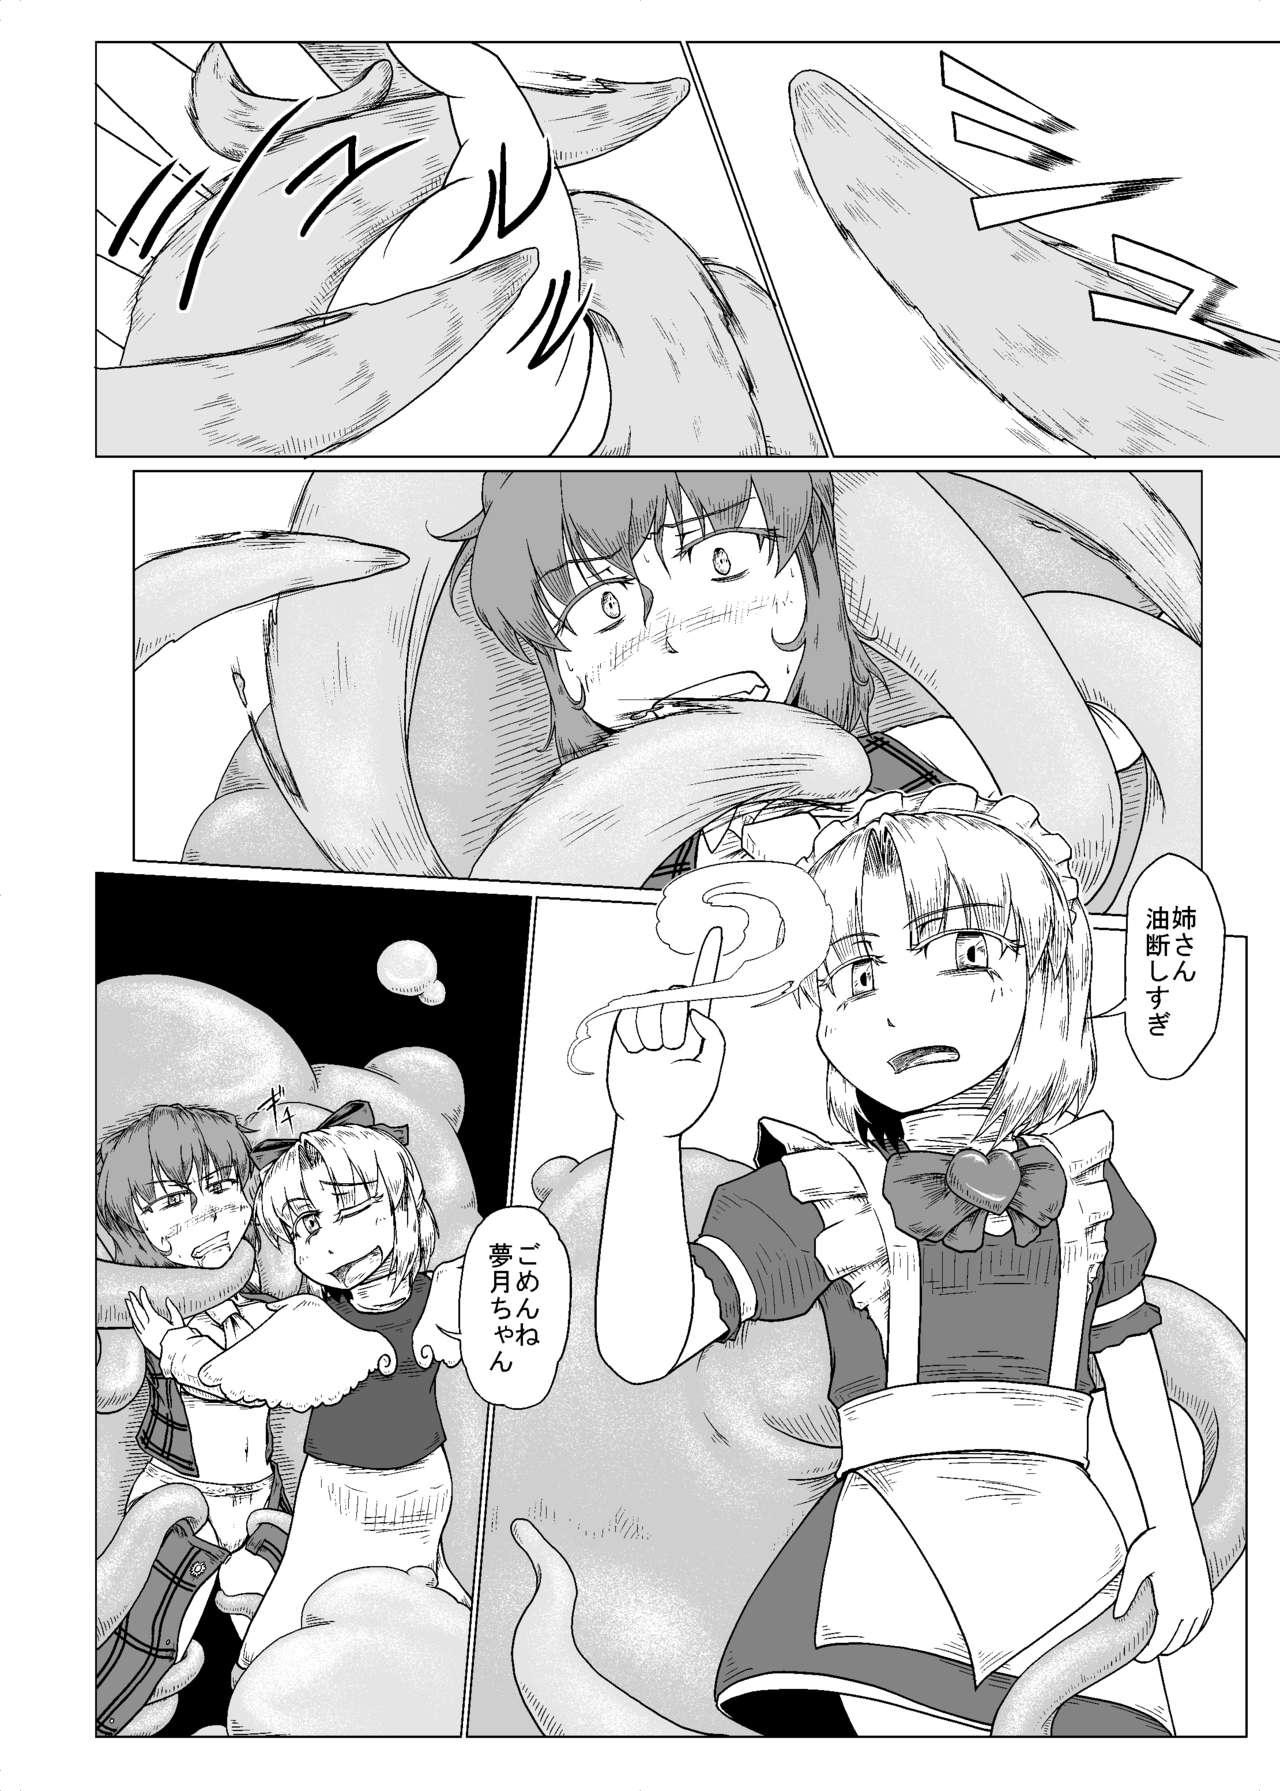 Rubdown 夢にとける - Touhou project Cocksucker - Page 9